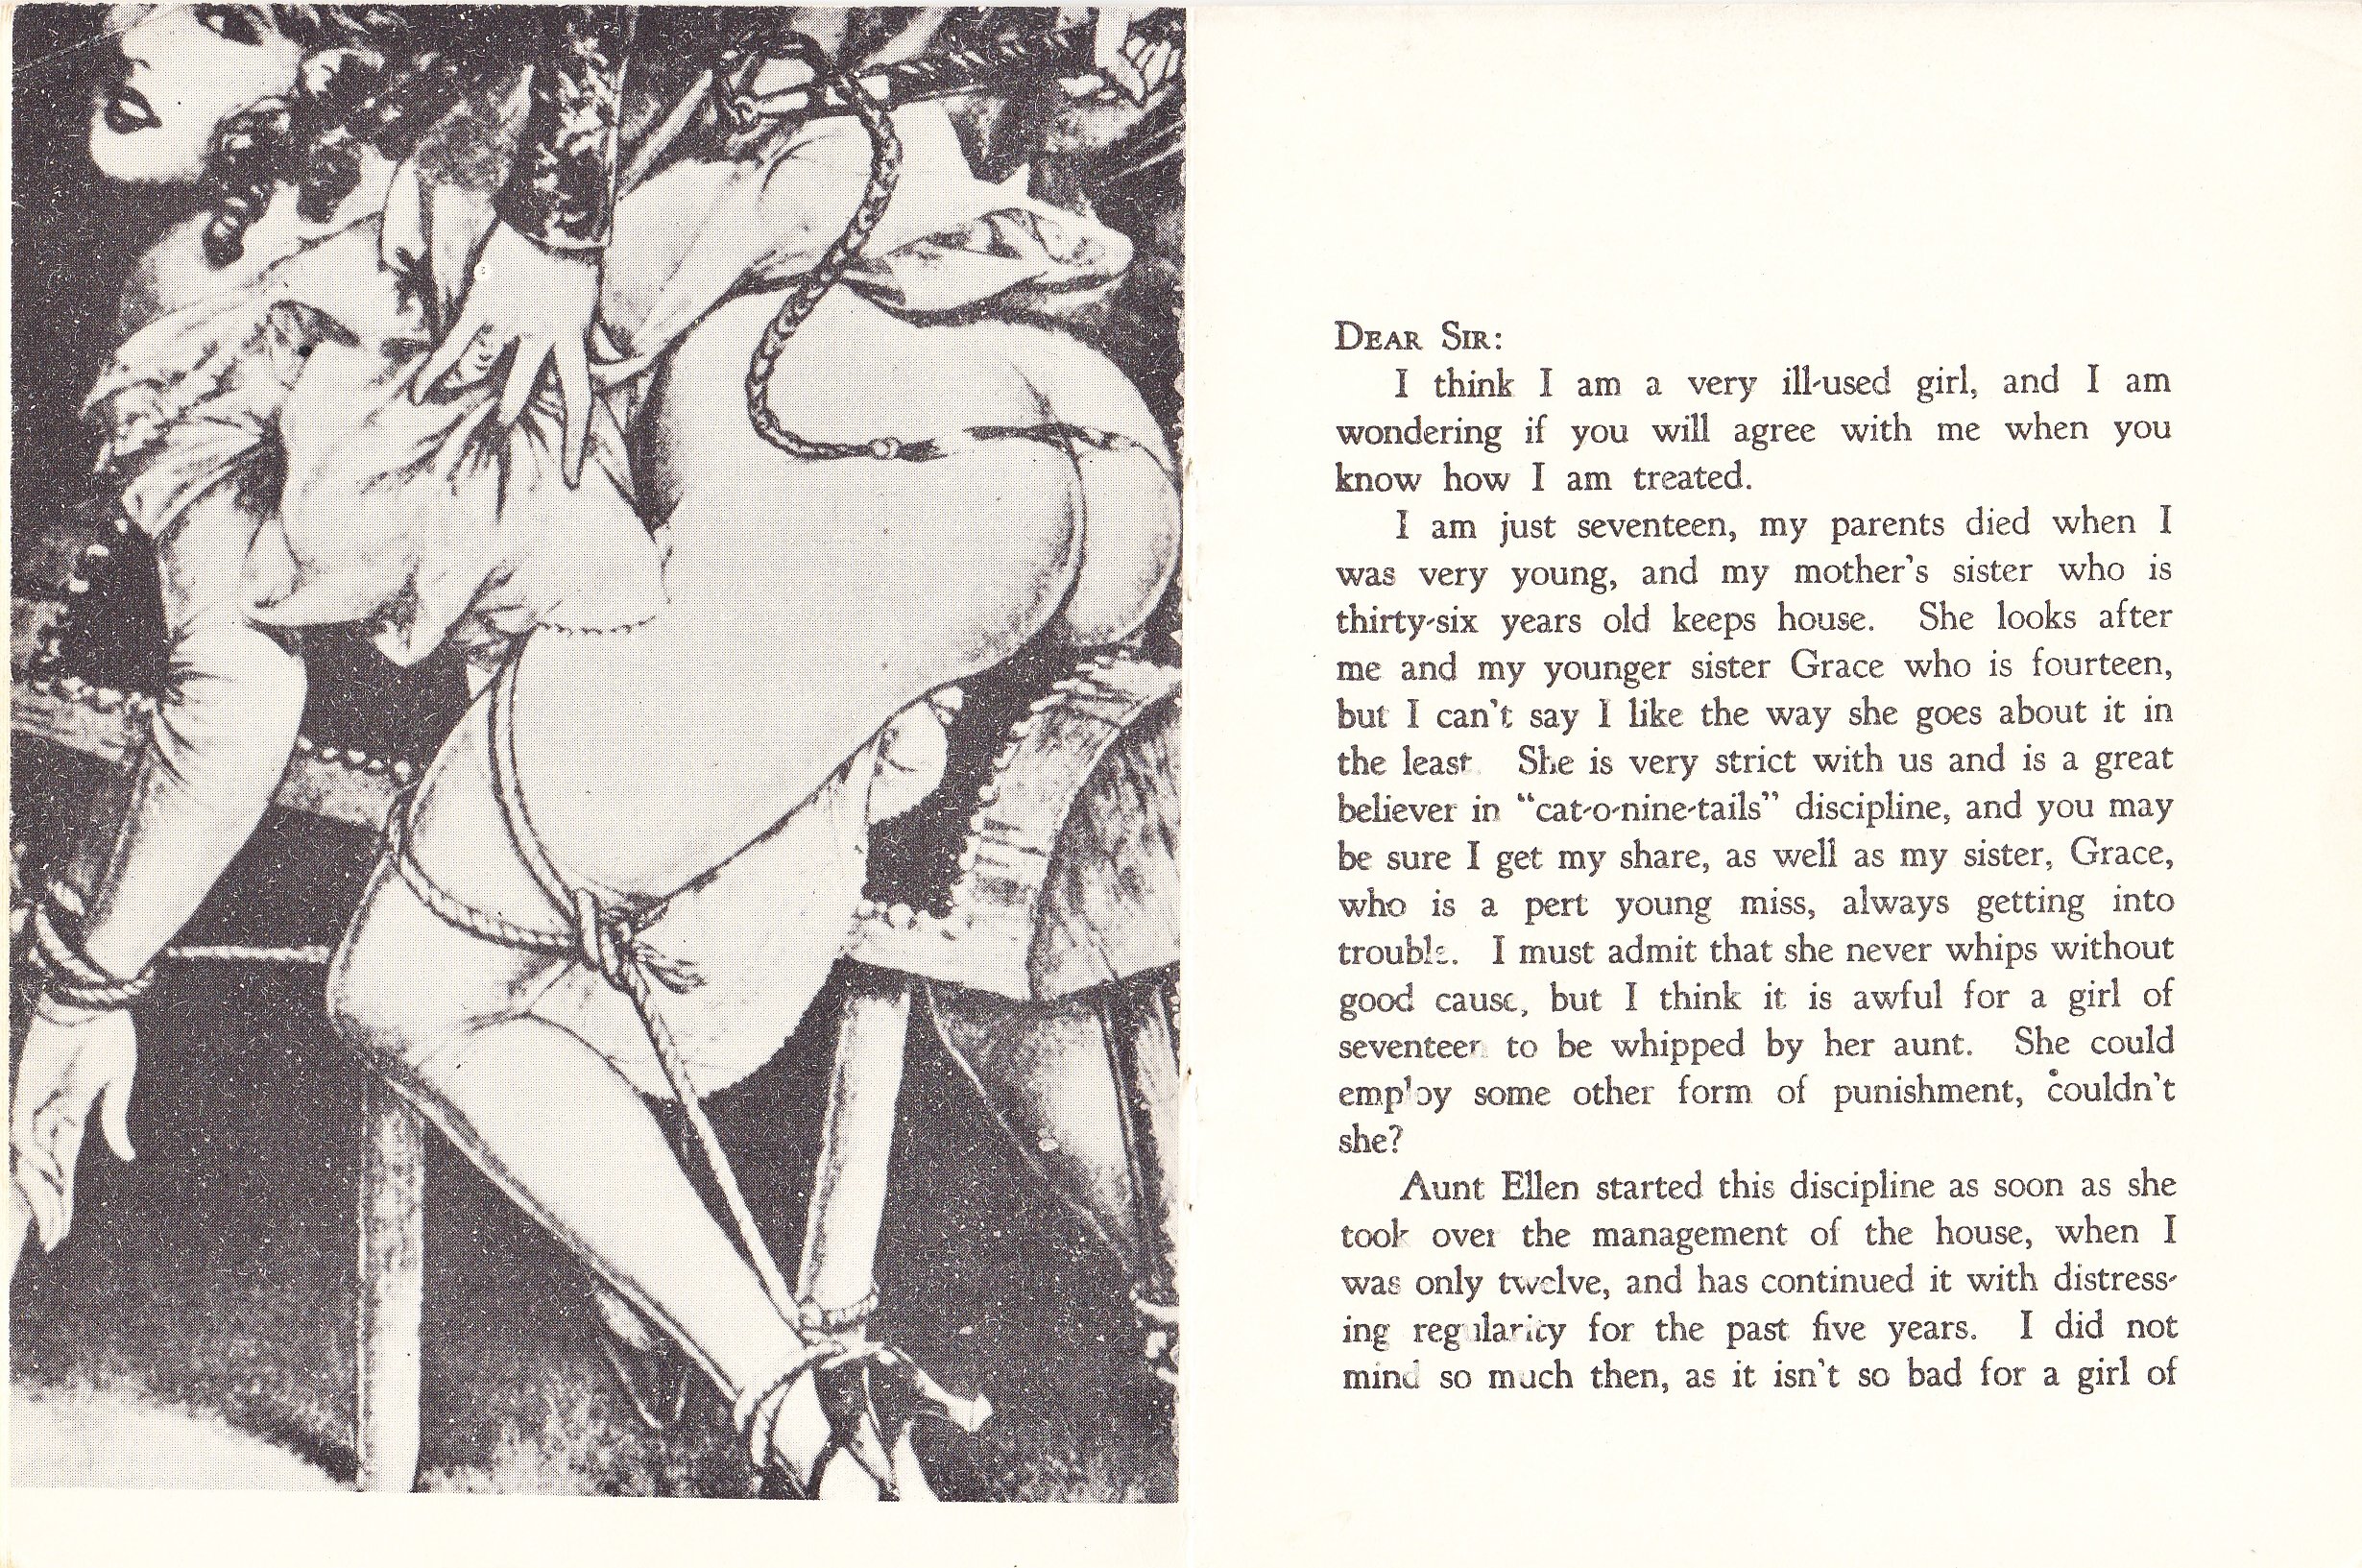 Chéri Hérouard, 'UNIQUE, For Lovers of the Unusual' Spanking Illustrations_13.jpg